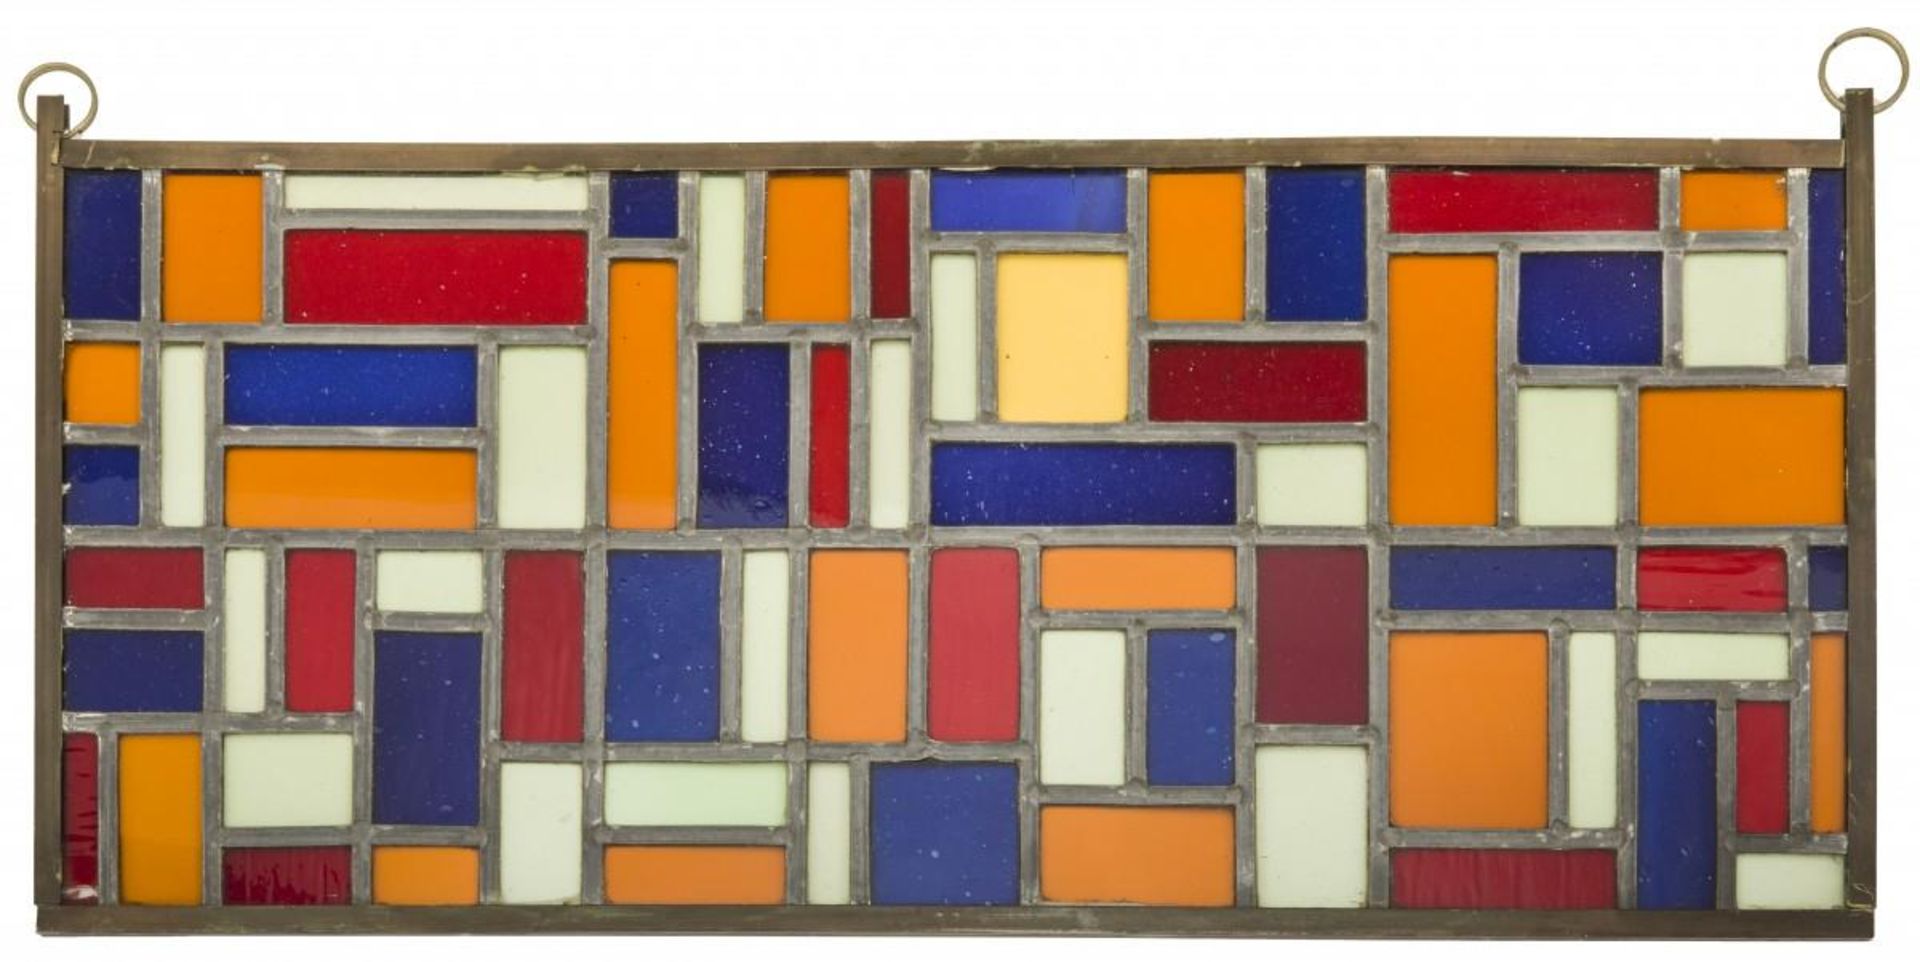 Theo van Doesburg (Utrecht 1883 - 1931 Davos), Composition VIII, a stained glass window for resedent